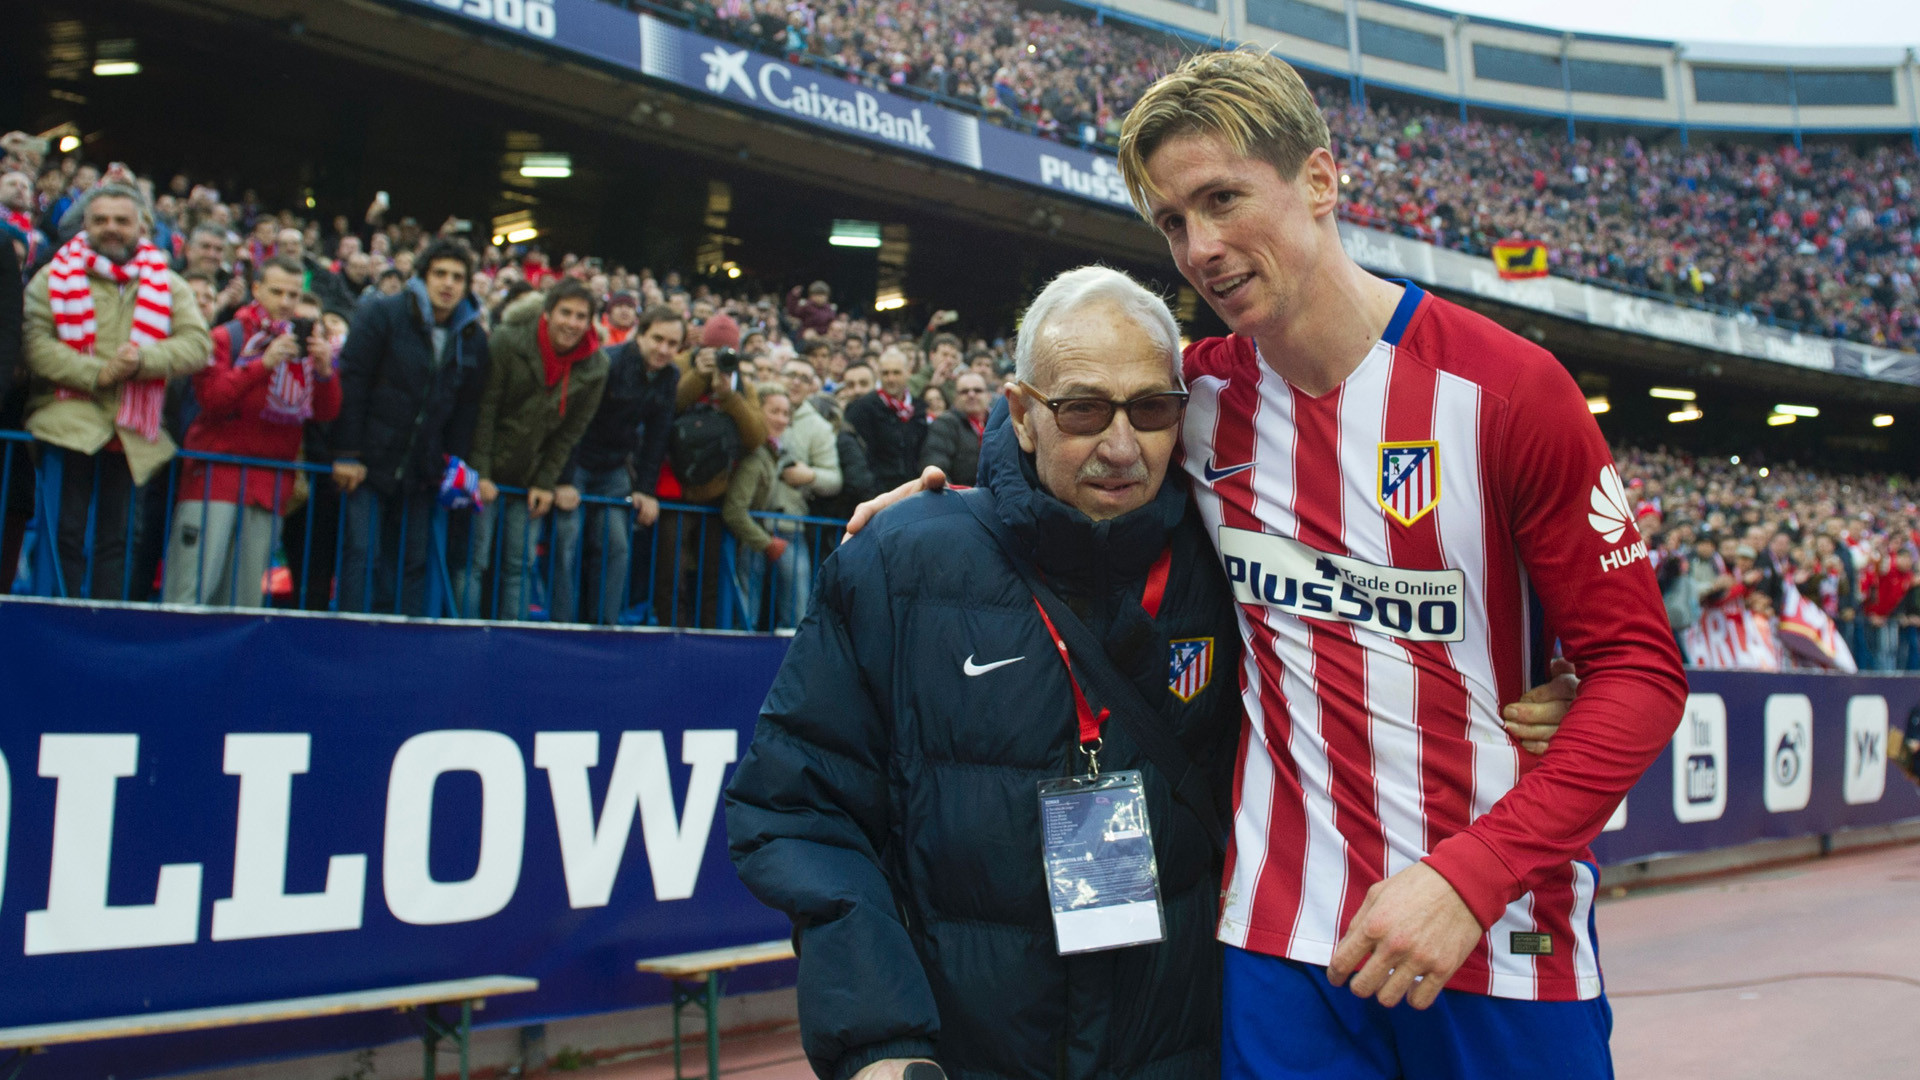 1920x1080 Torres recently scored his 100th goal for Atleti